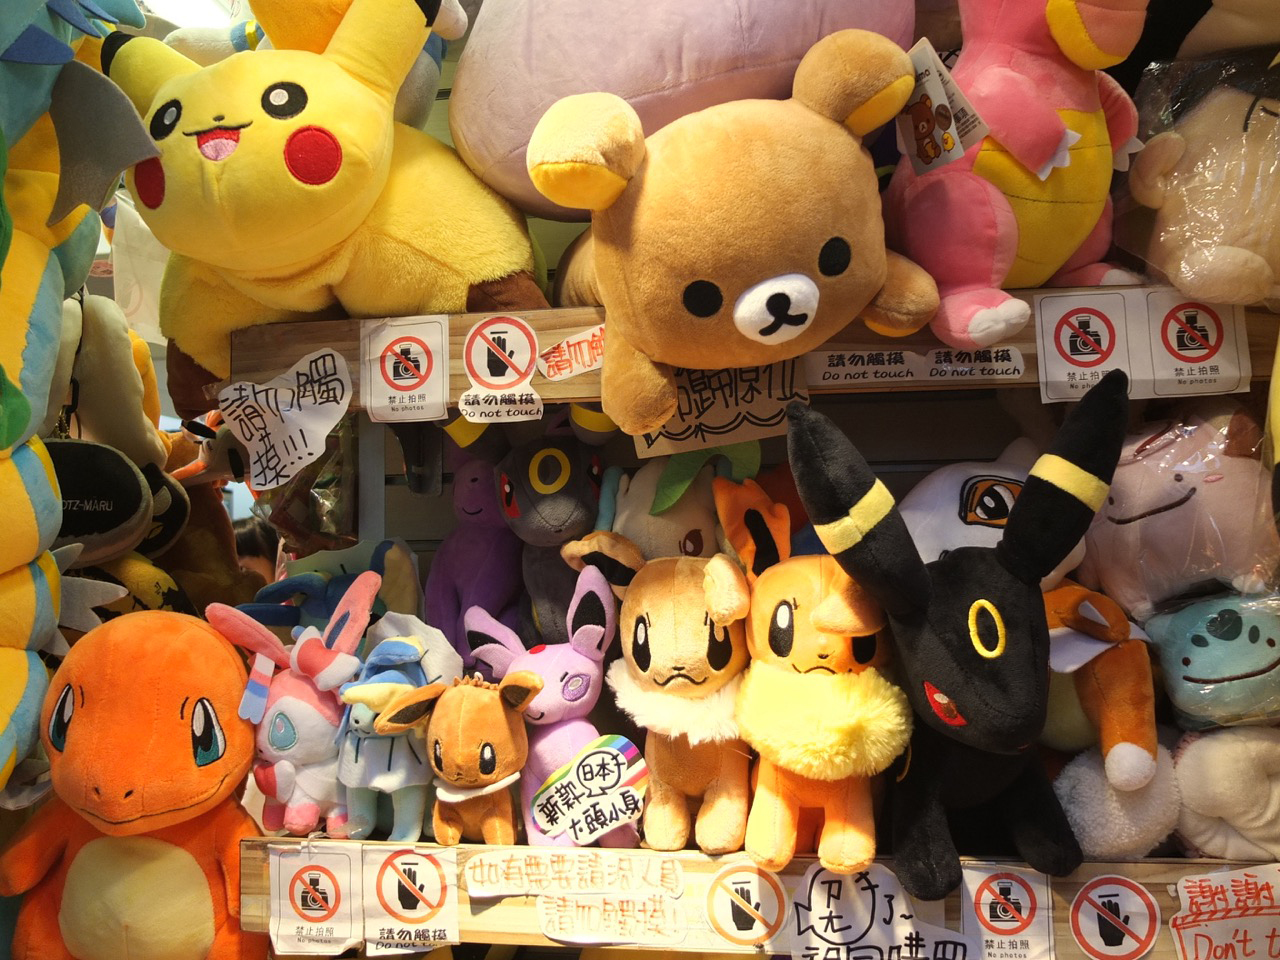 Examples of Japanese pop culture are everywhere in Taiwan's shopping districts. | KAORI SHOJI